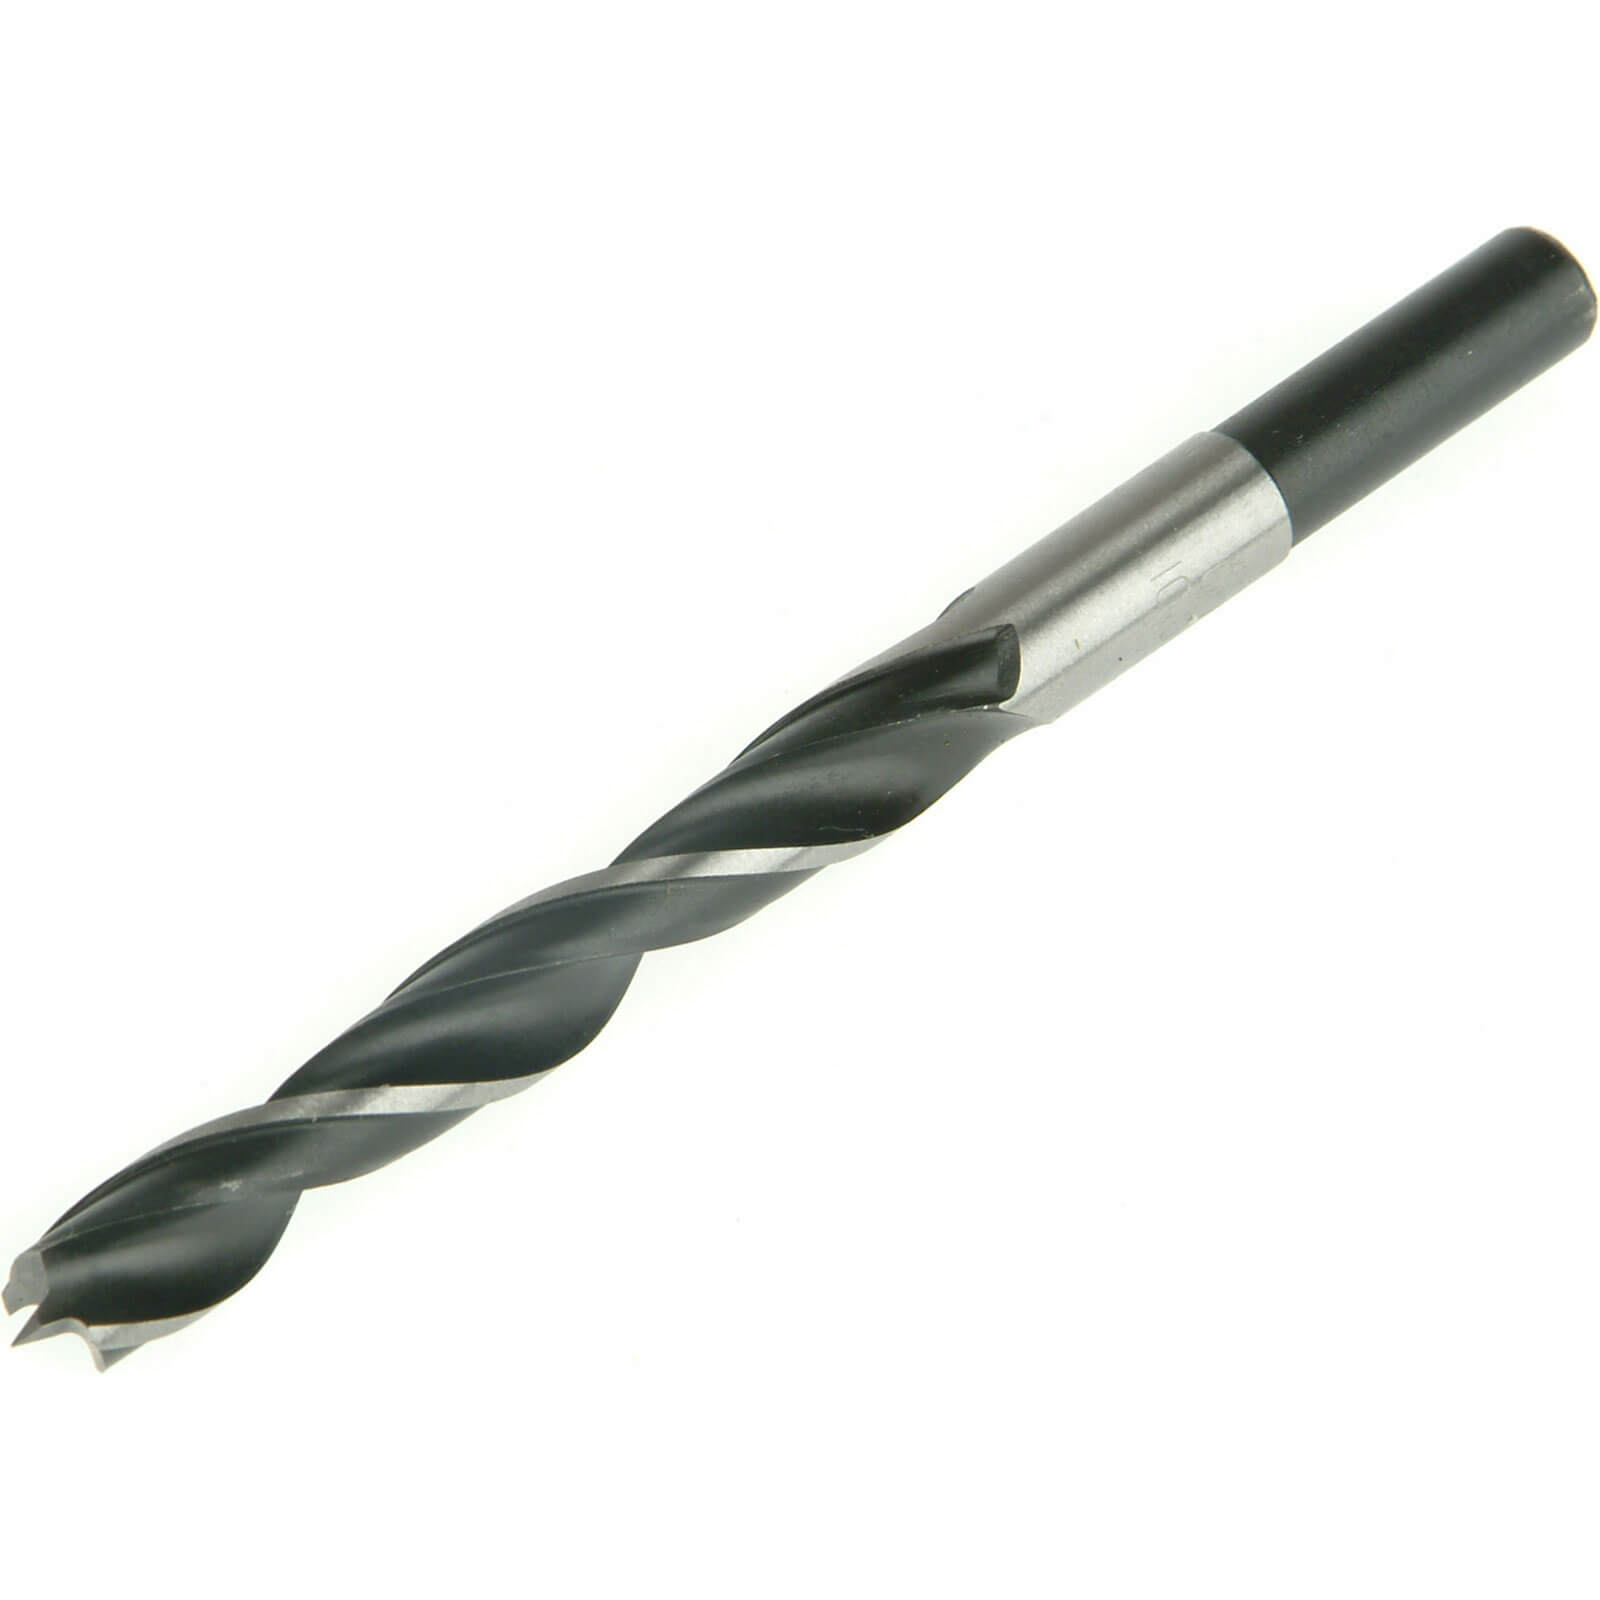 Photo of Faithfull Lip And Spur Wood Drill Bit 5mm